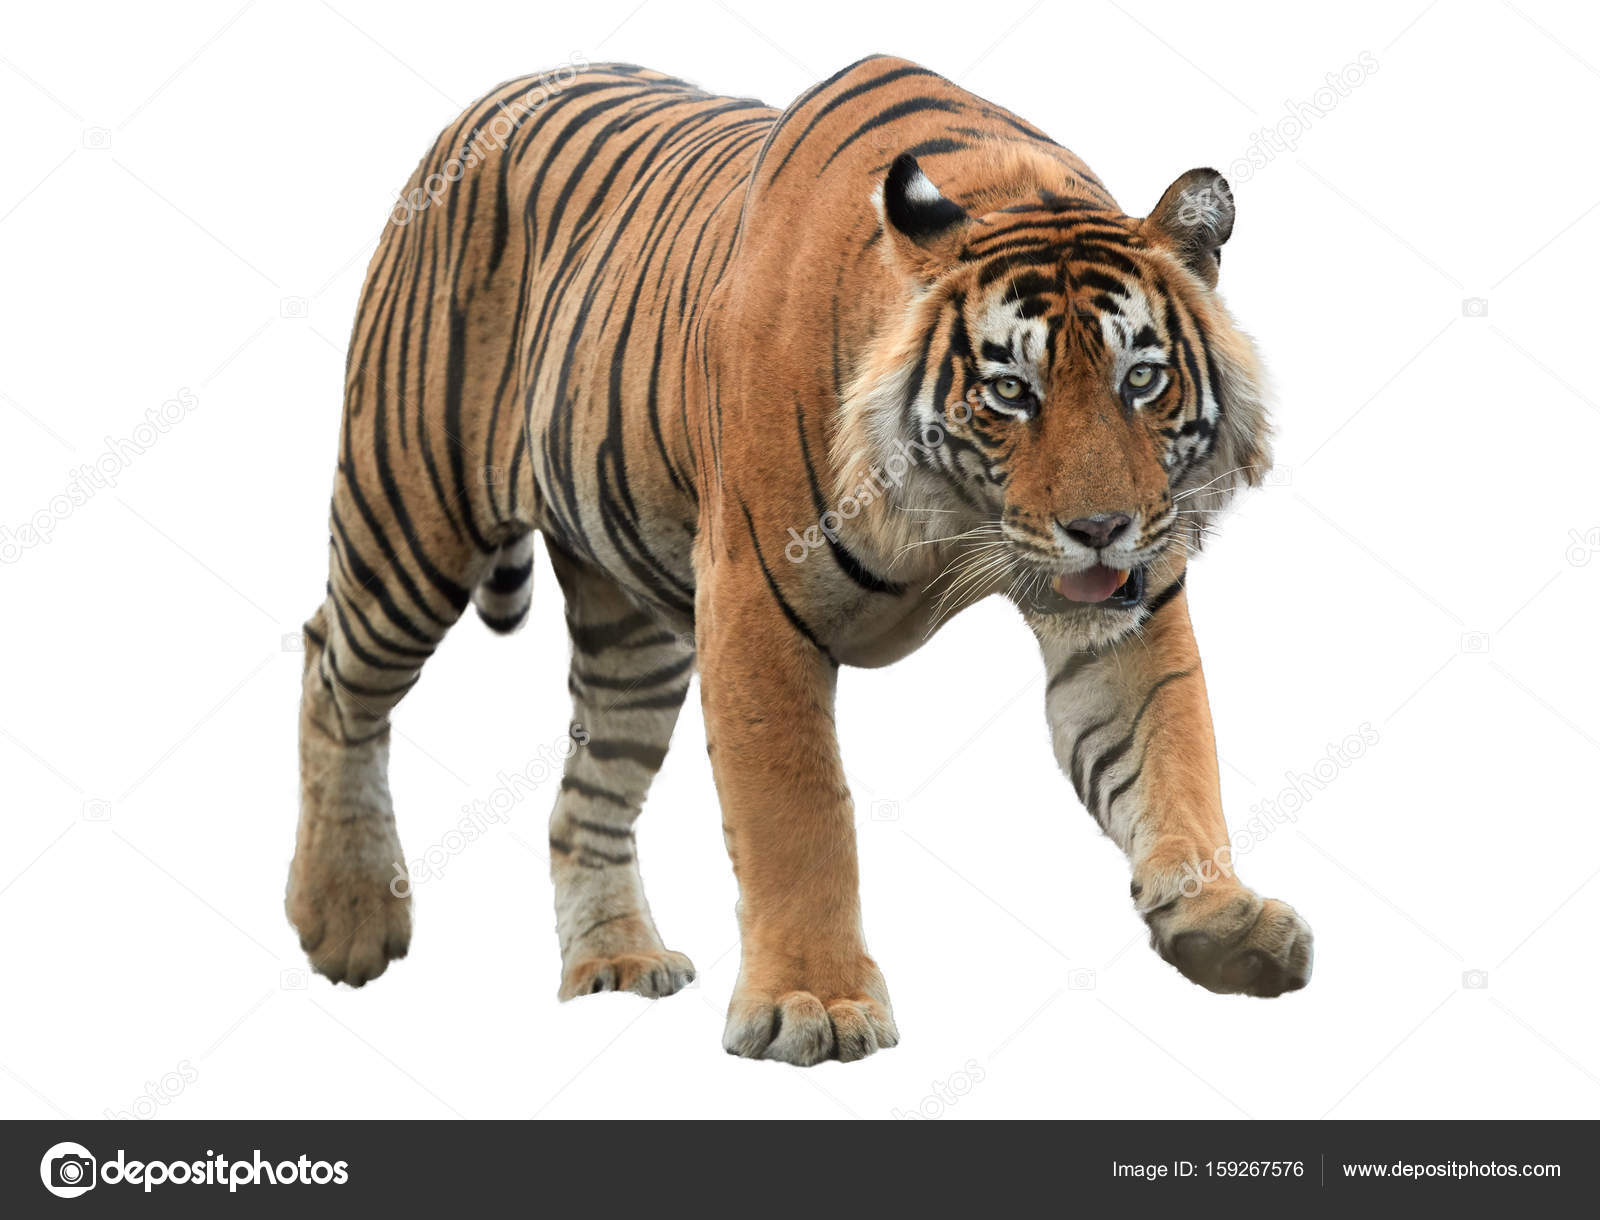 Male of Bengal tiger, Panthera tigris, isolated on white backgroMale of  Bengal tiger, Panthera tigris, isolated on white background. Tiger from  front view, staring directly at camera. Indian wildlife, Ranthambore,  India. Stock